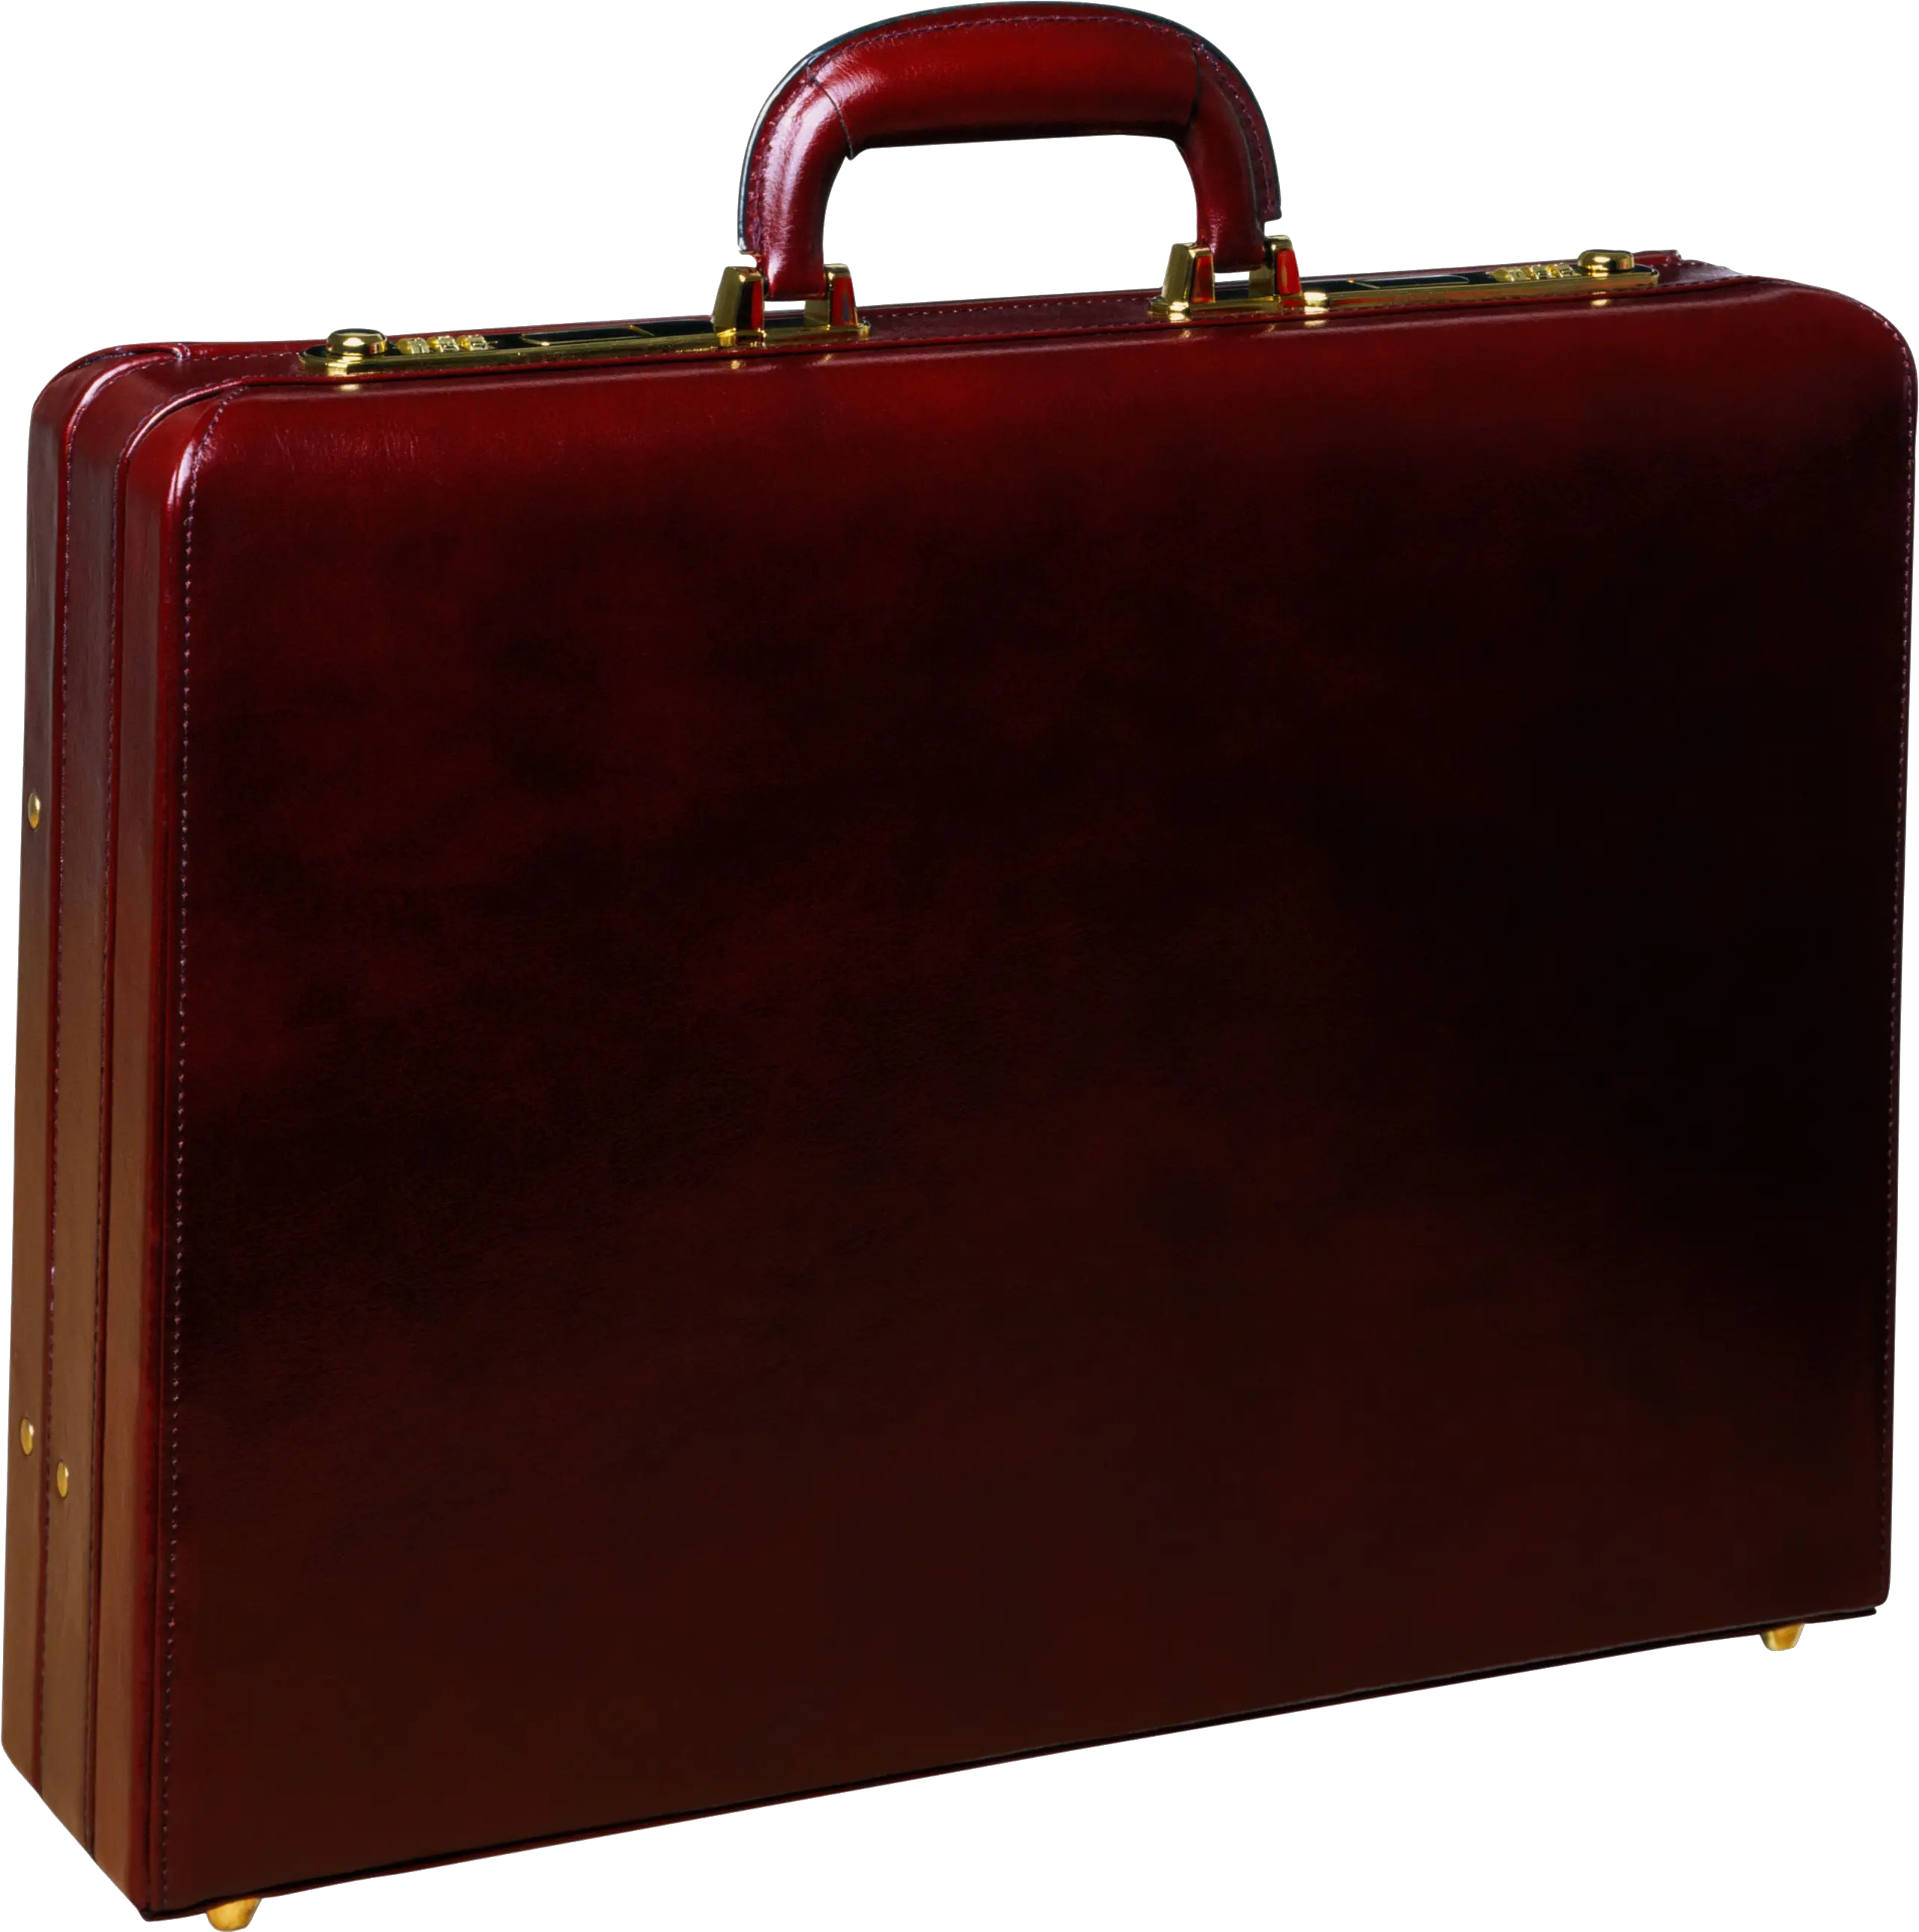 Suitcase Png Images Free Download Suitcase Png Luggage Png